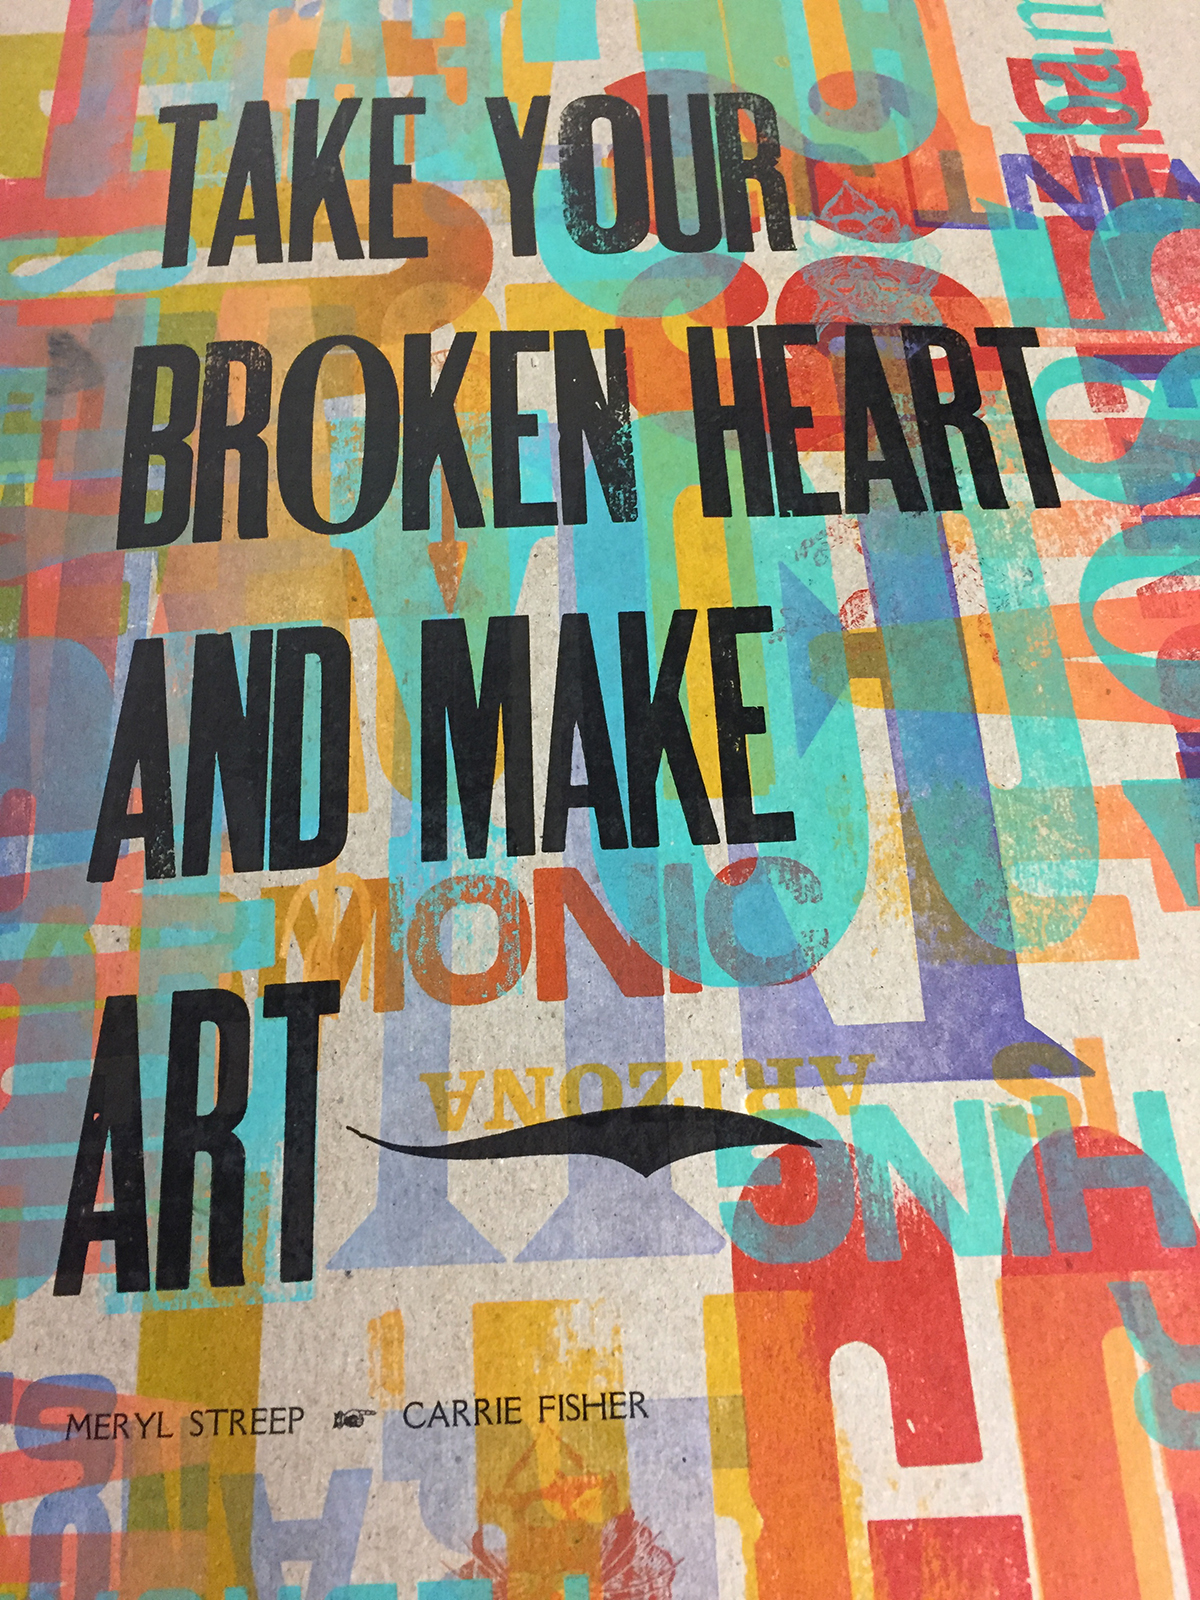 Image of poster created by Jeryl Jones "Take your broken art and create art. -Meryl Streep and Carrie Fisher "